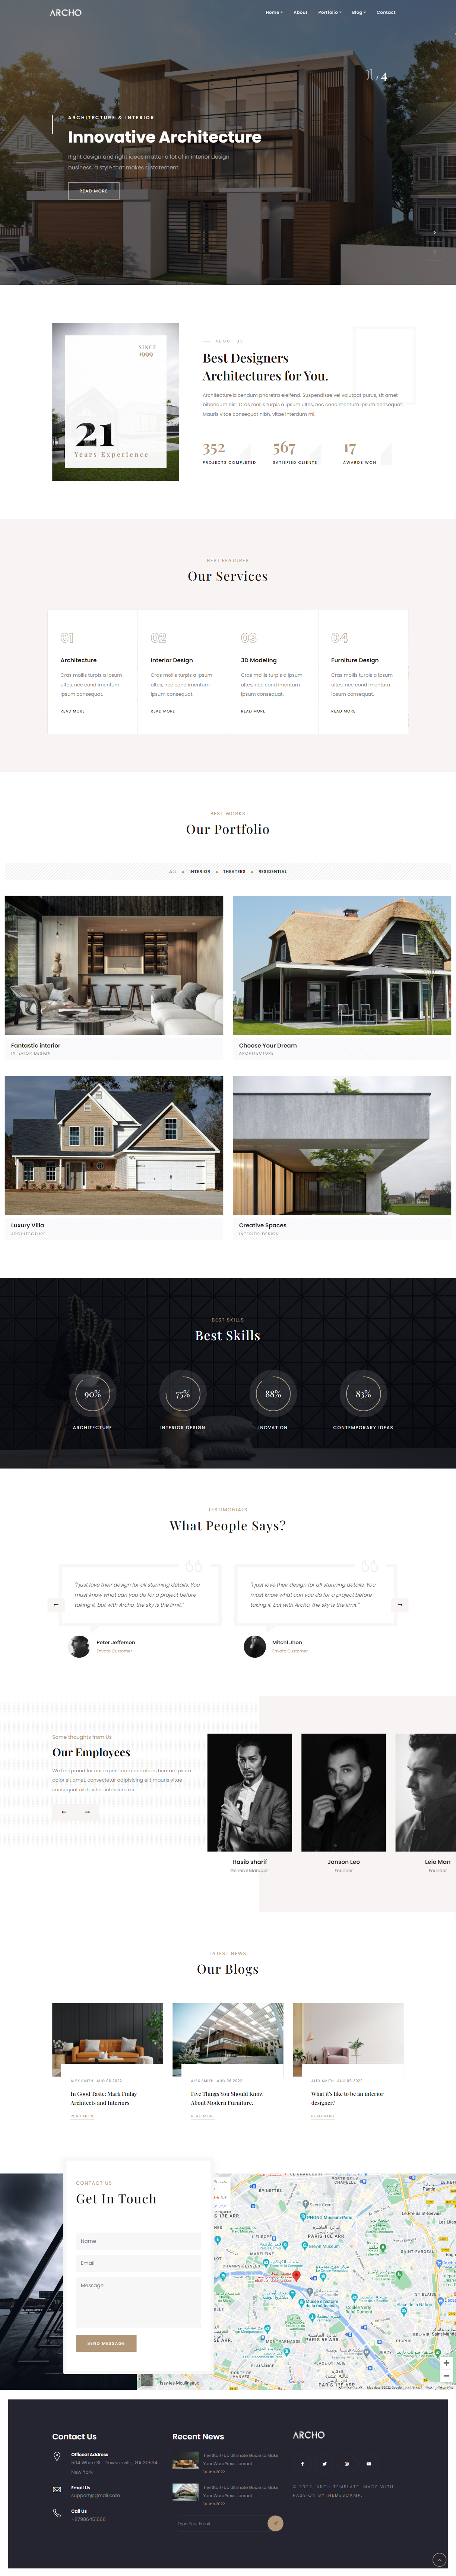 mẫu giao diện website thiết kế xây dựng archo